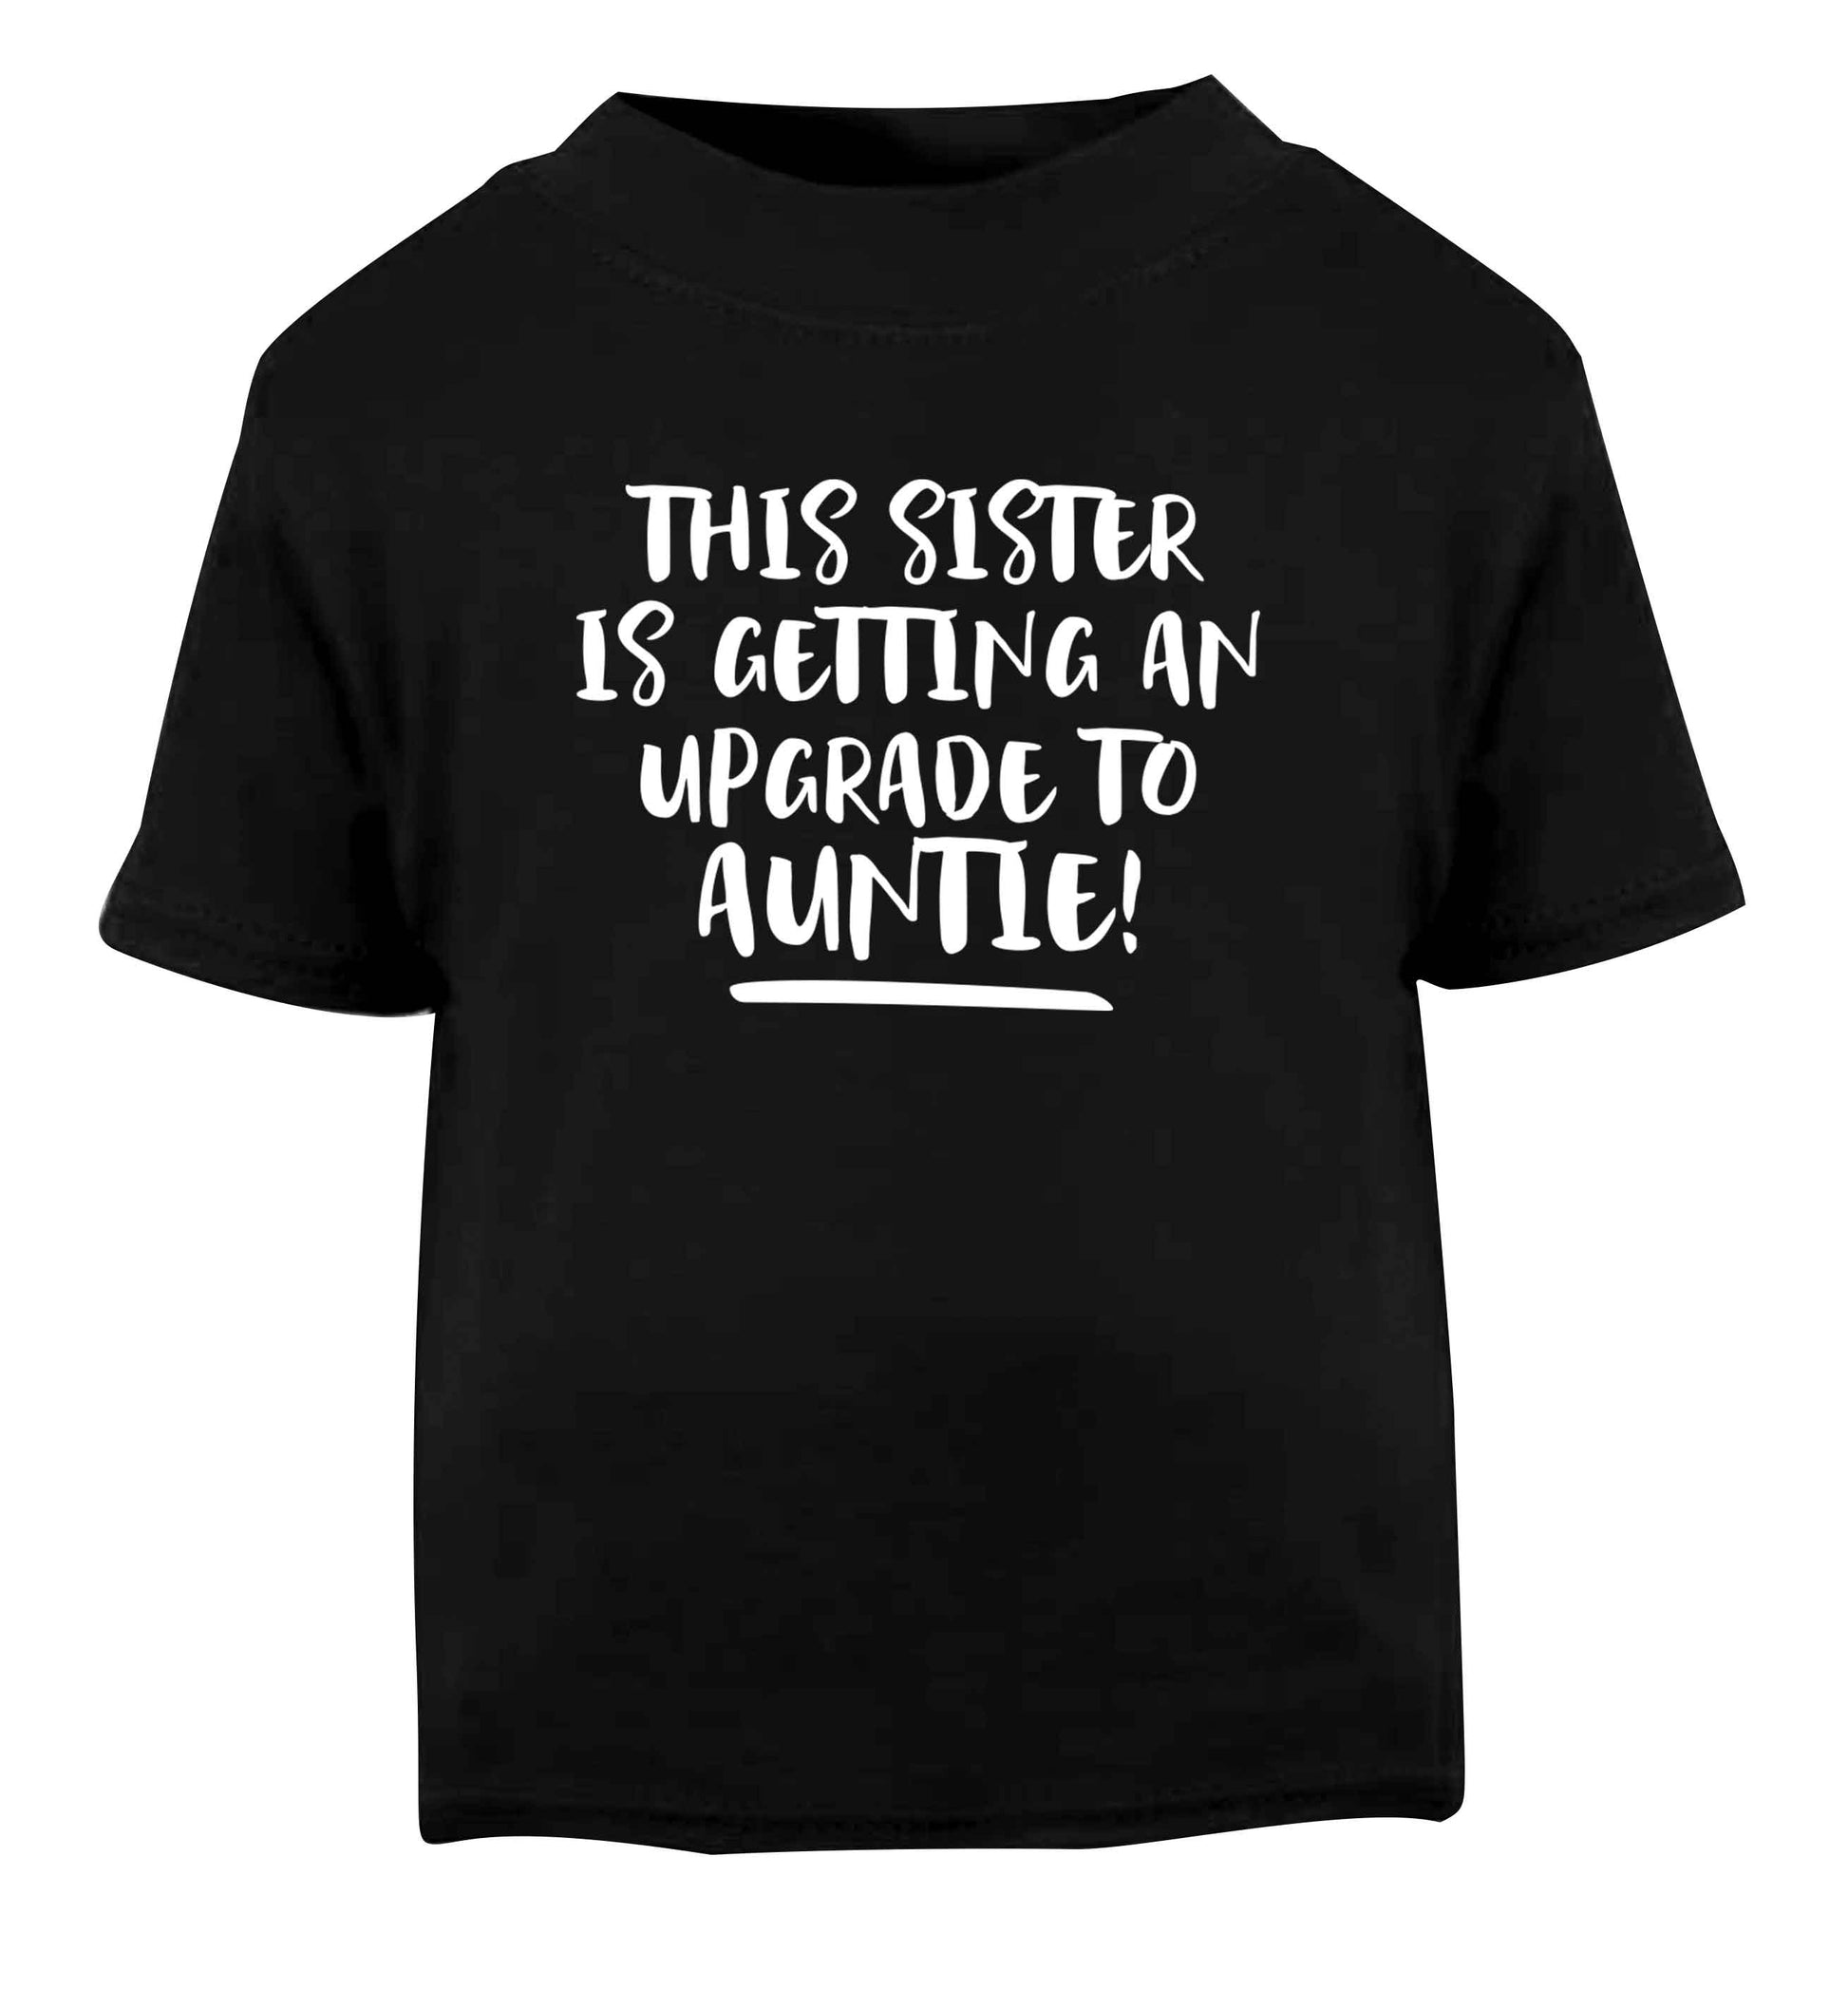 This sister is getting an upgrade to auntie! Black Baby Toddler Tshirt 2 years